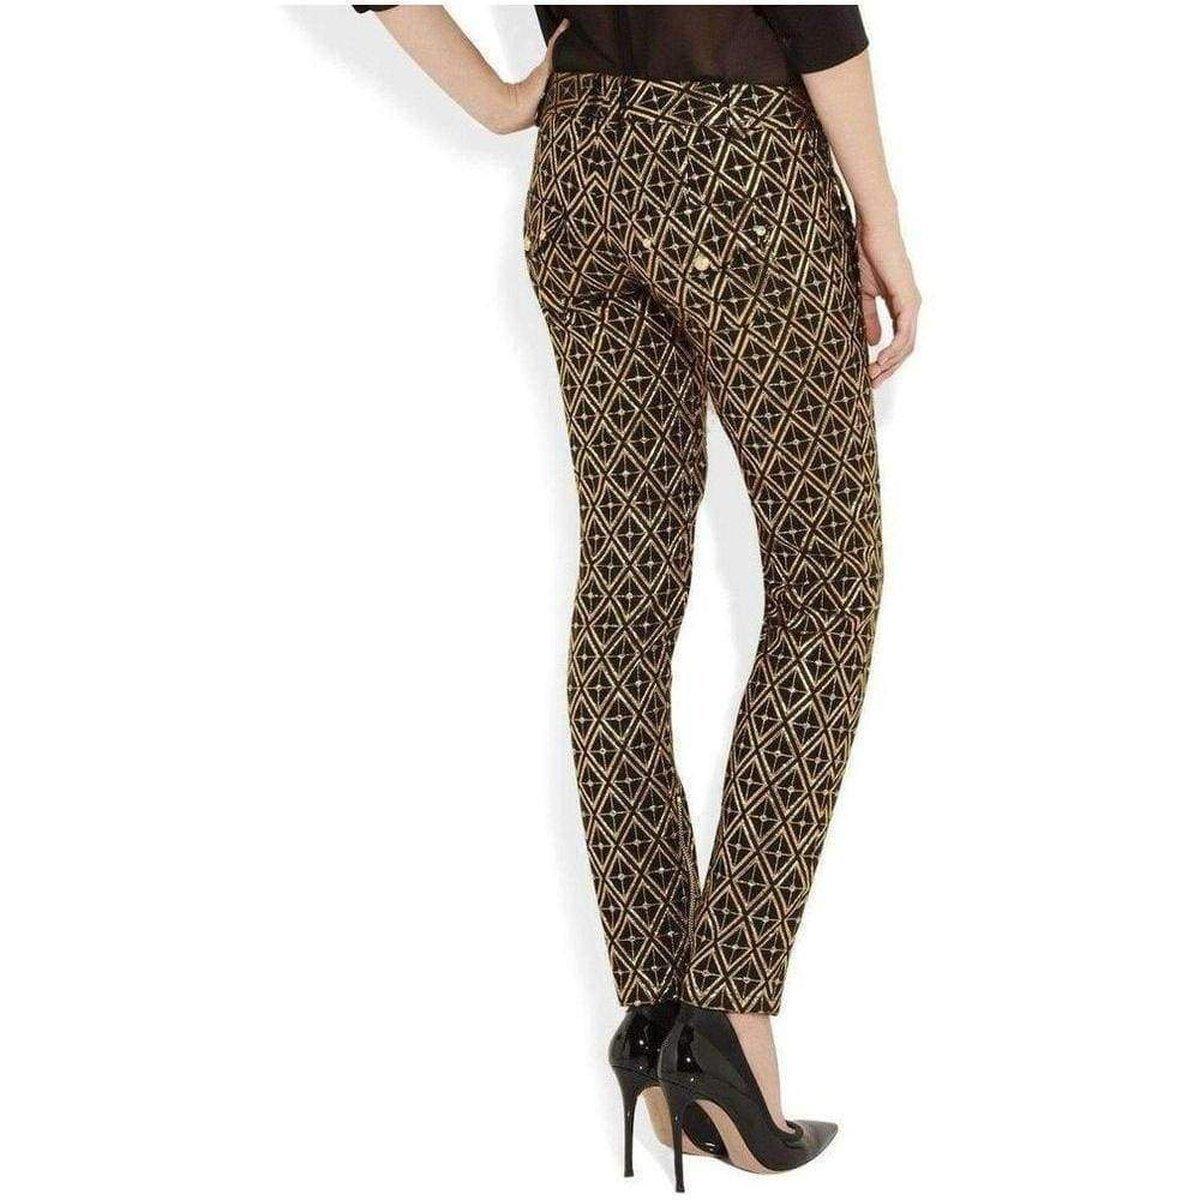 Balmain Metallic jacquard skinny pants FR40 In New Condition For Sale In Brossard, QC